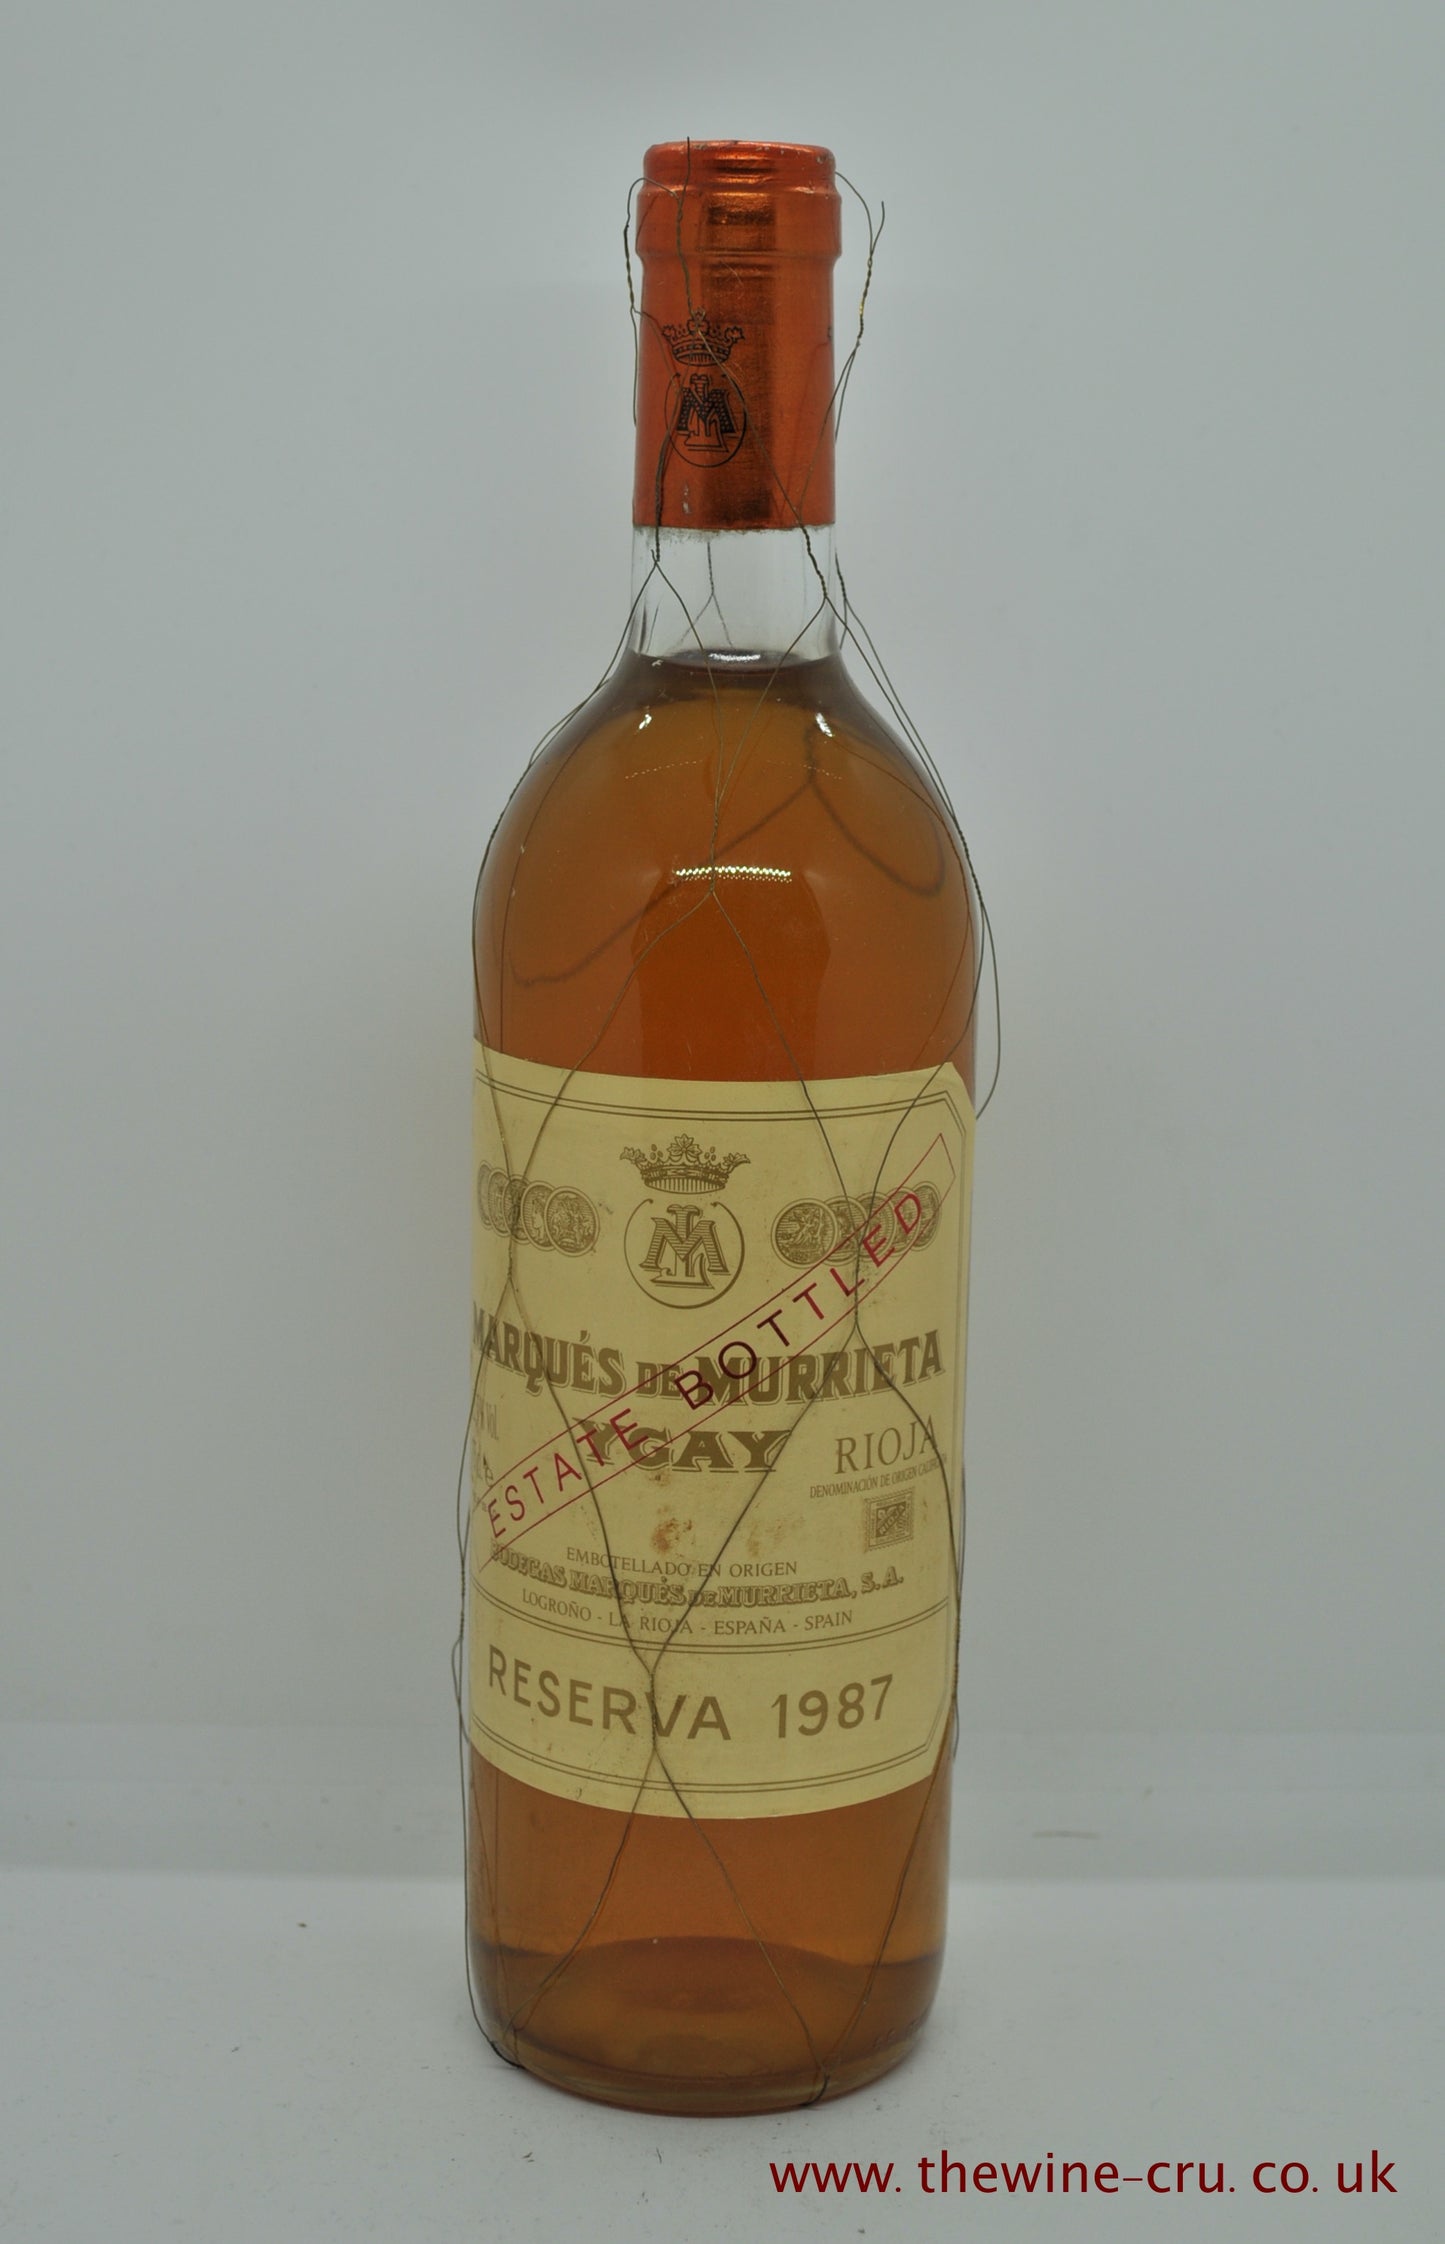 1987 vintage white wine. Marques de Murrieta Ygay reserva blanco. Spain. The bottle is in good condition generally . Wire mesh is still attached with breaks in it and the level of the wine is base of neck. Immediate delivery. Free local delivery. Gift wrapping available.